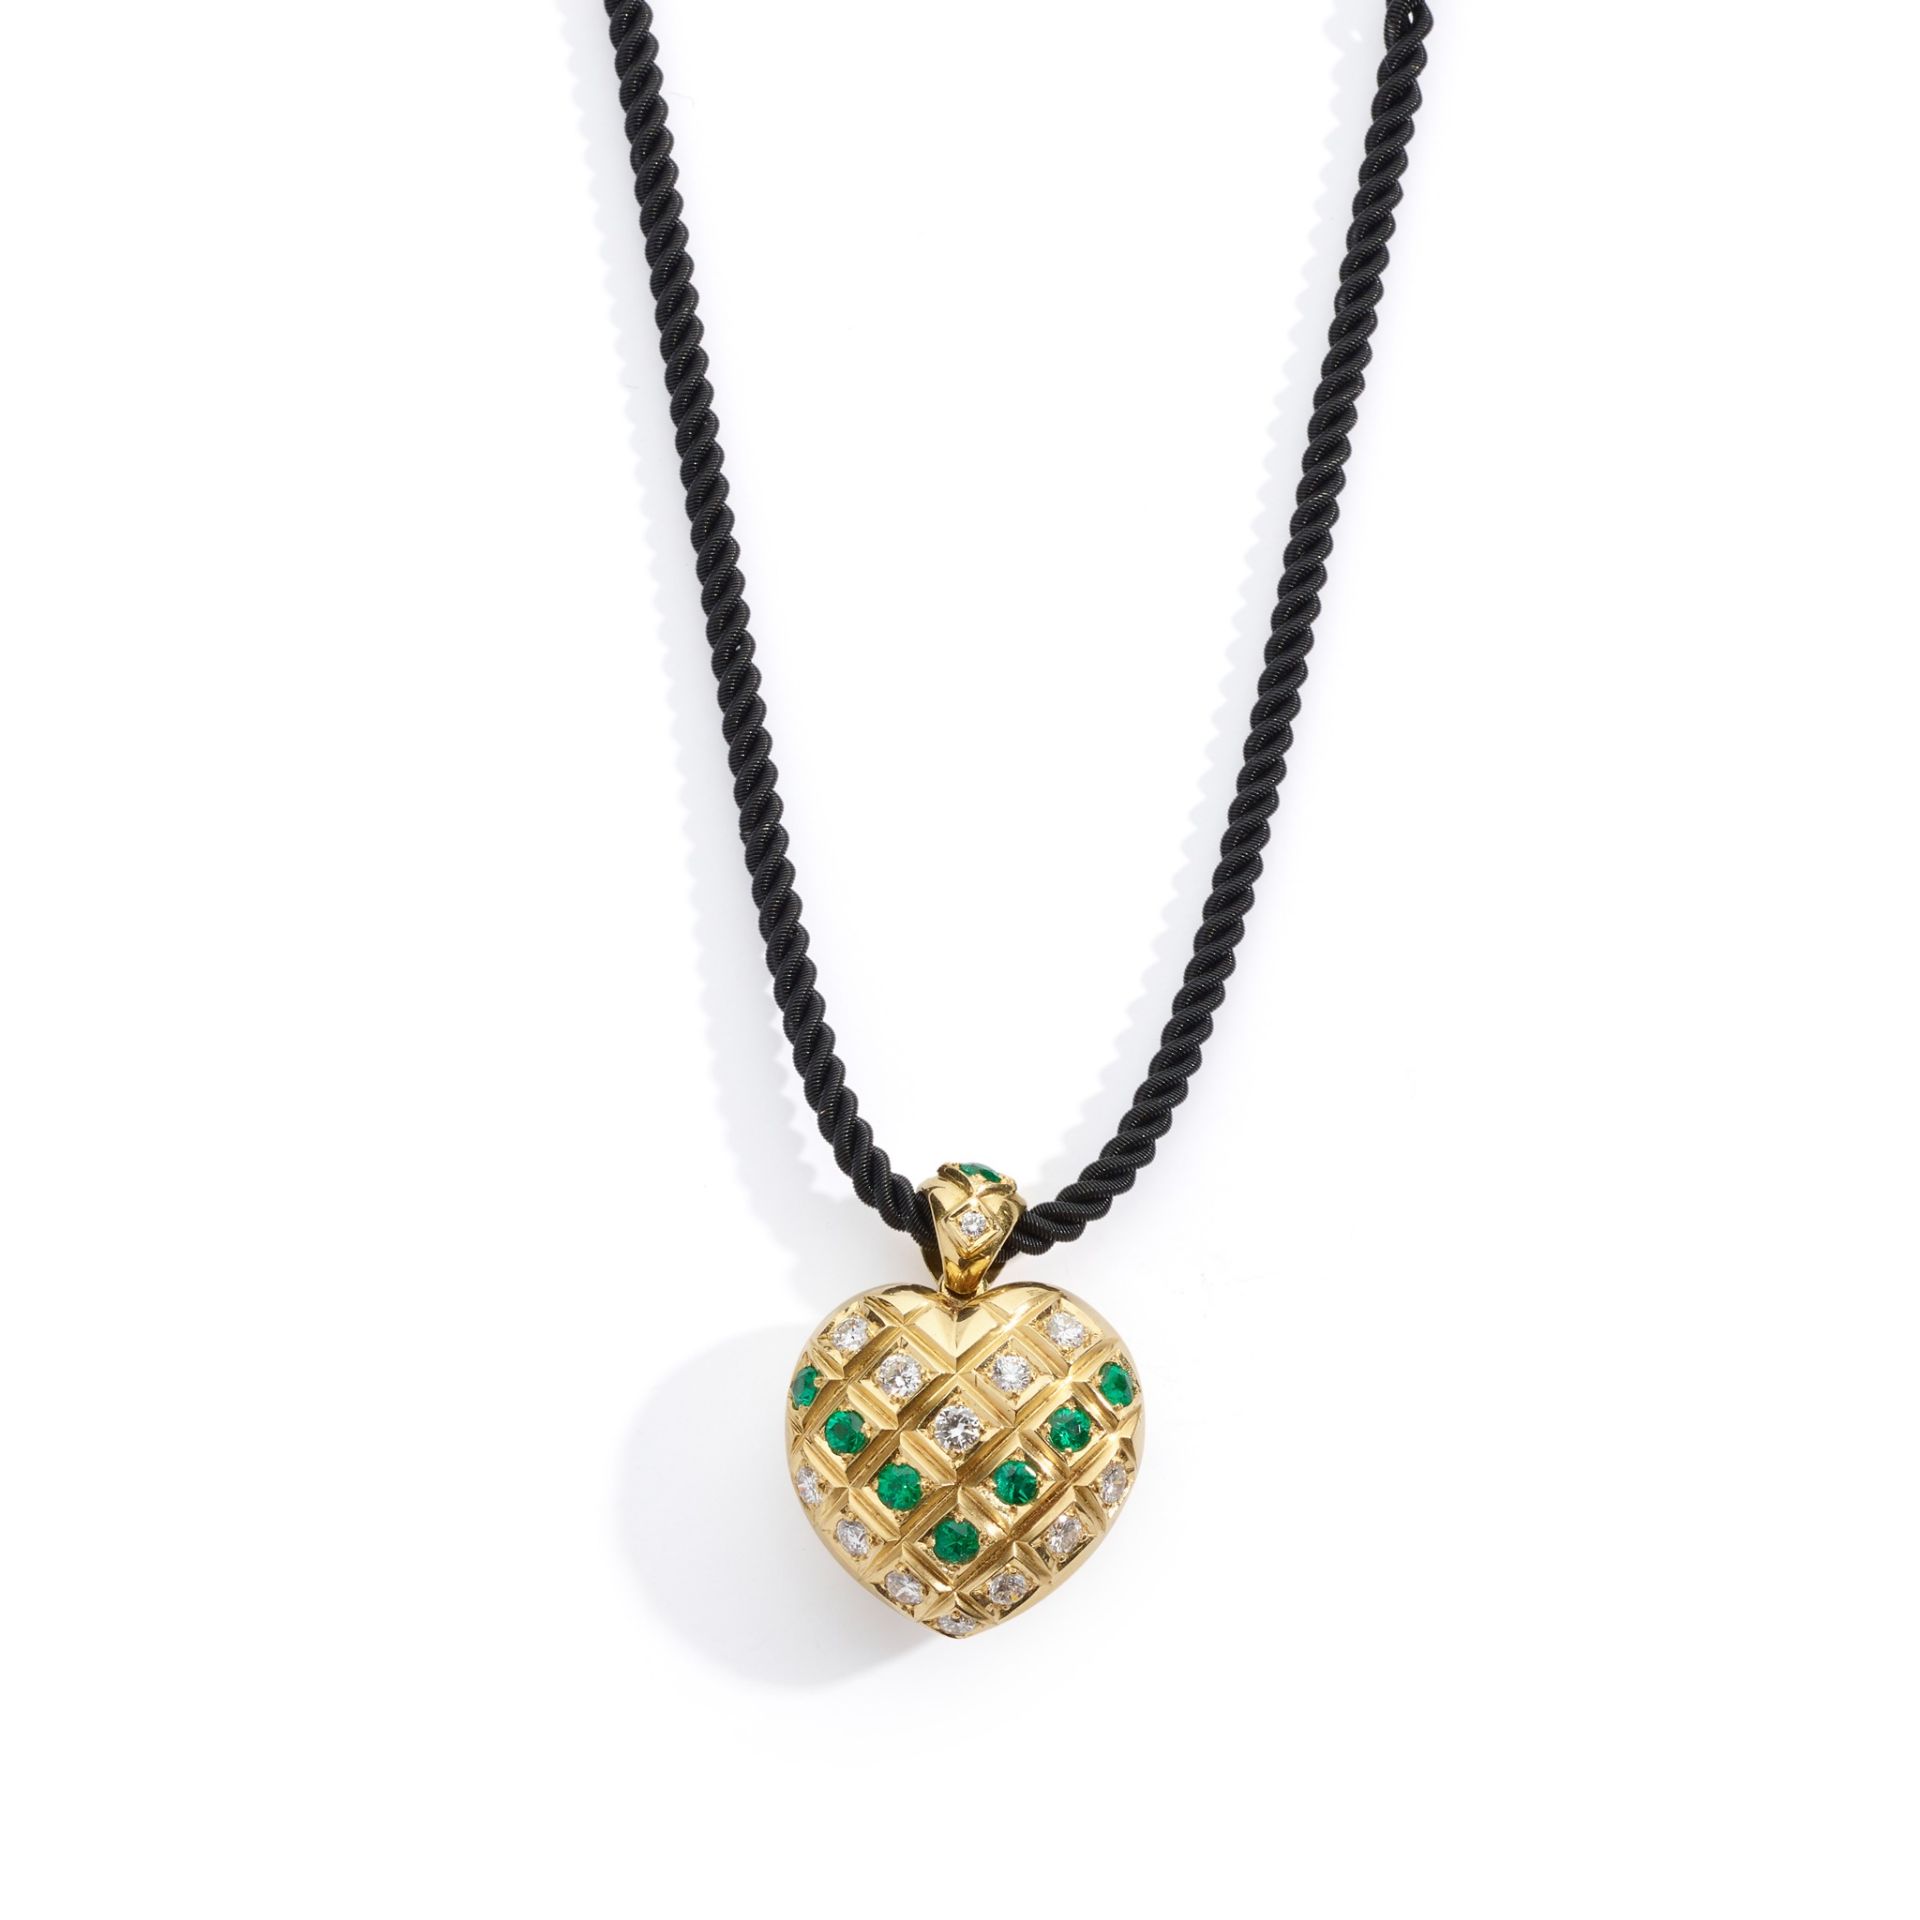 An emerald and diamond pendant necklace - Image 2 of 2